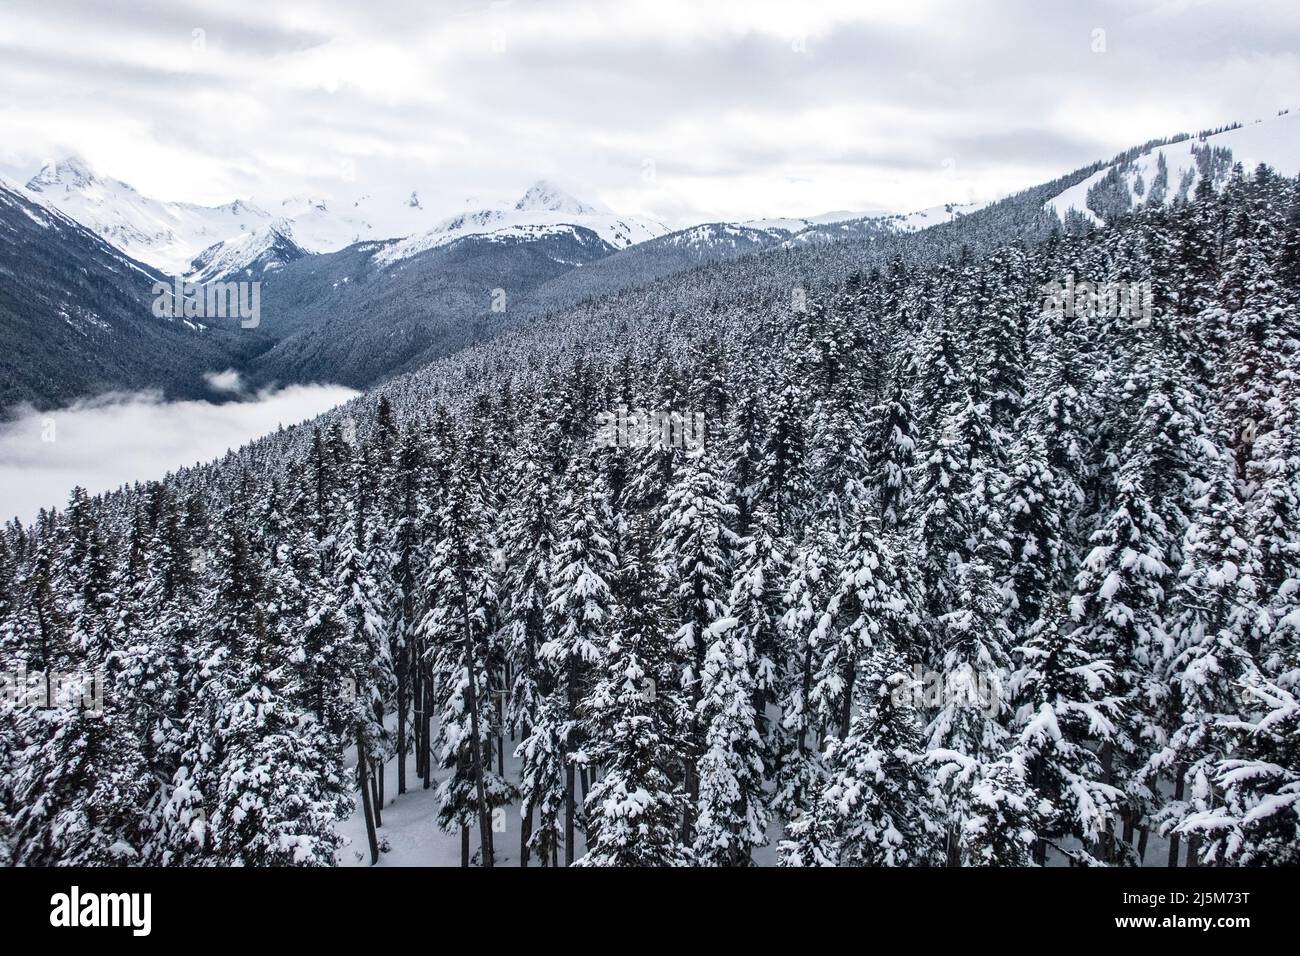 view of the Fitzsimmons mountain range in the winter with a snow covered evergreen tree forest, taken from the Peak to Peak gondola at Whistler and Bl Stock Photo